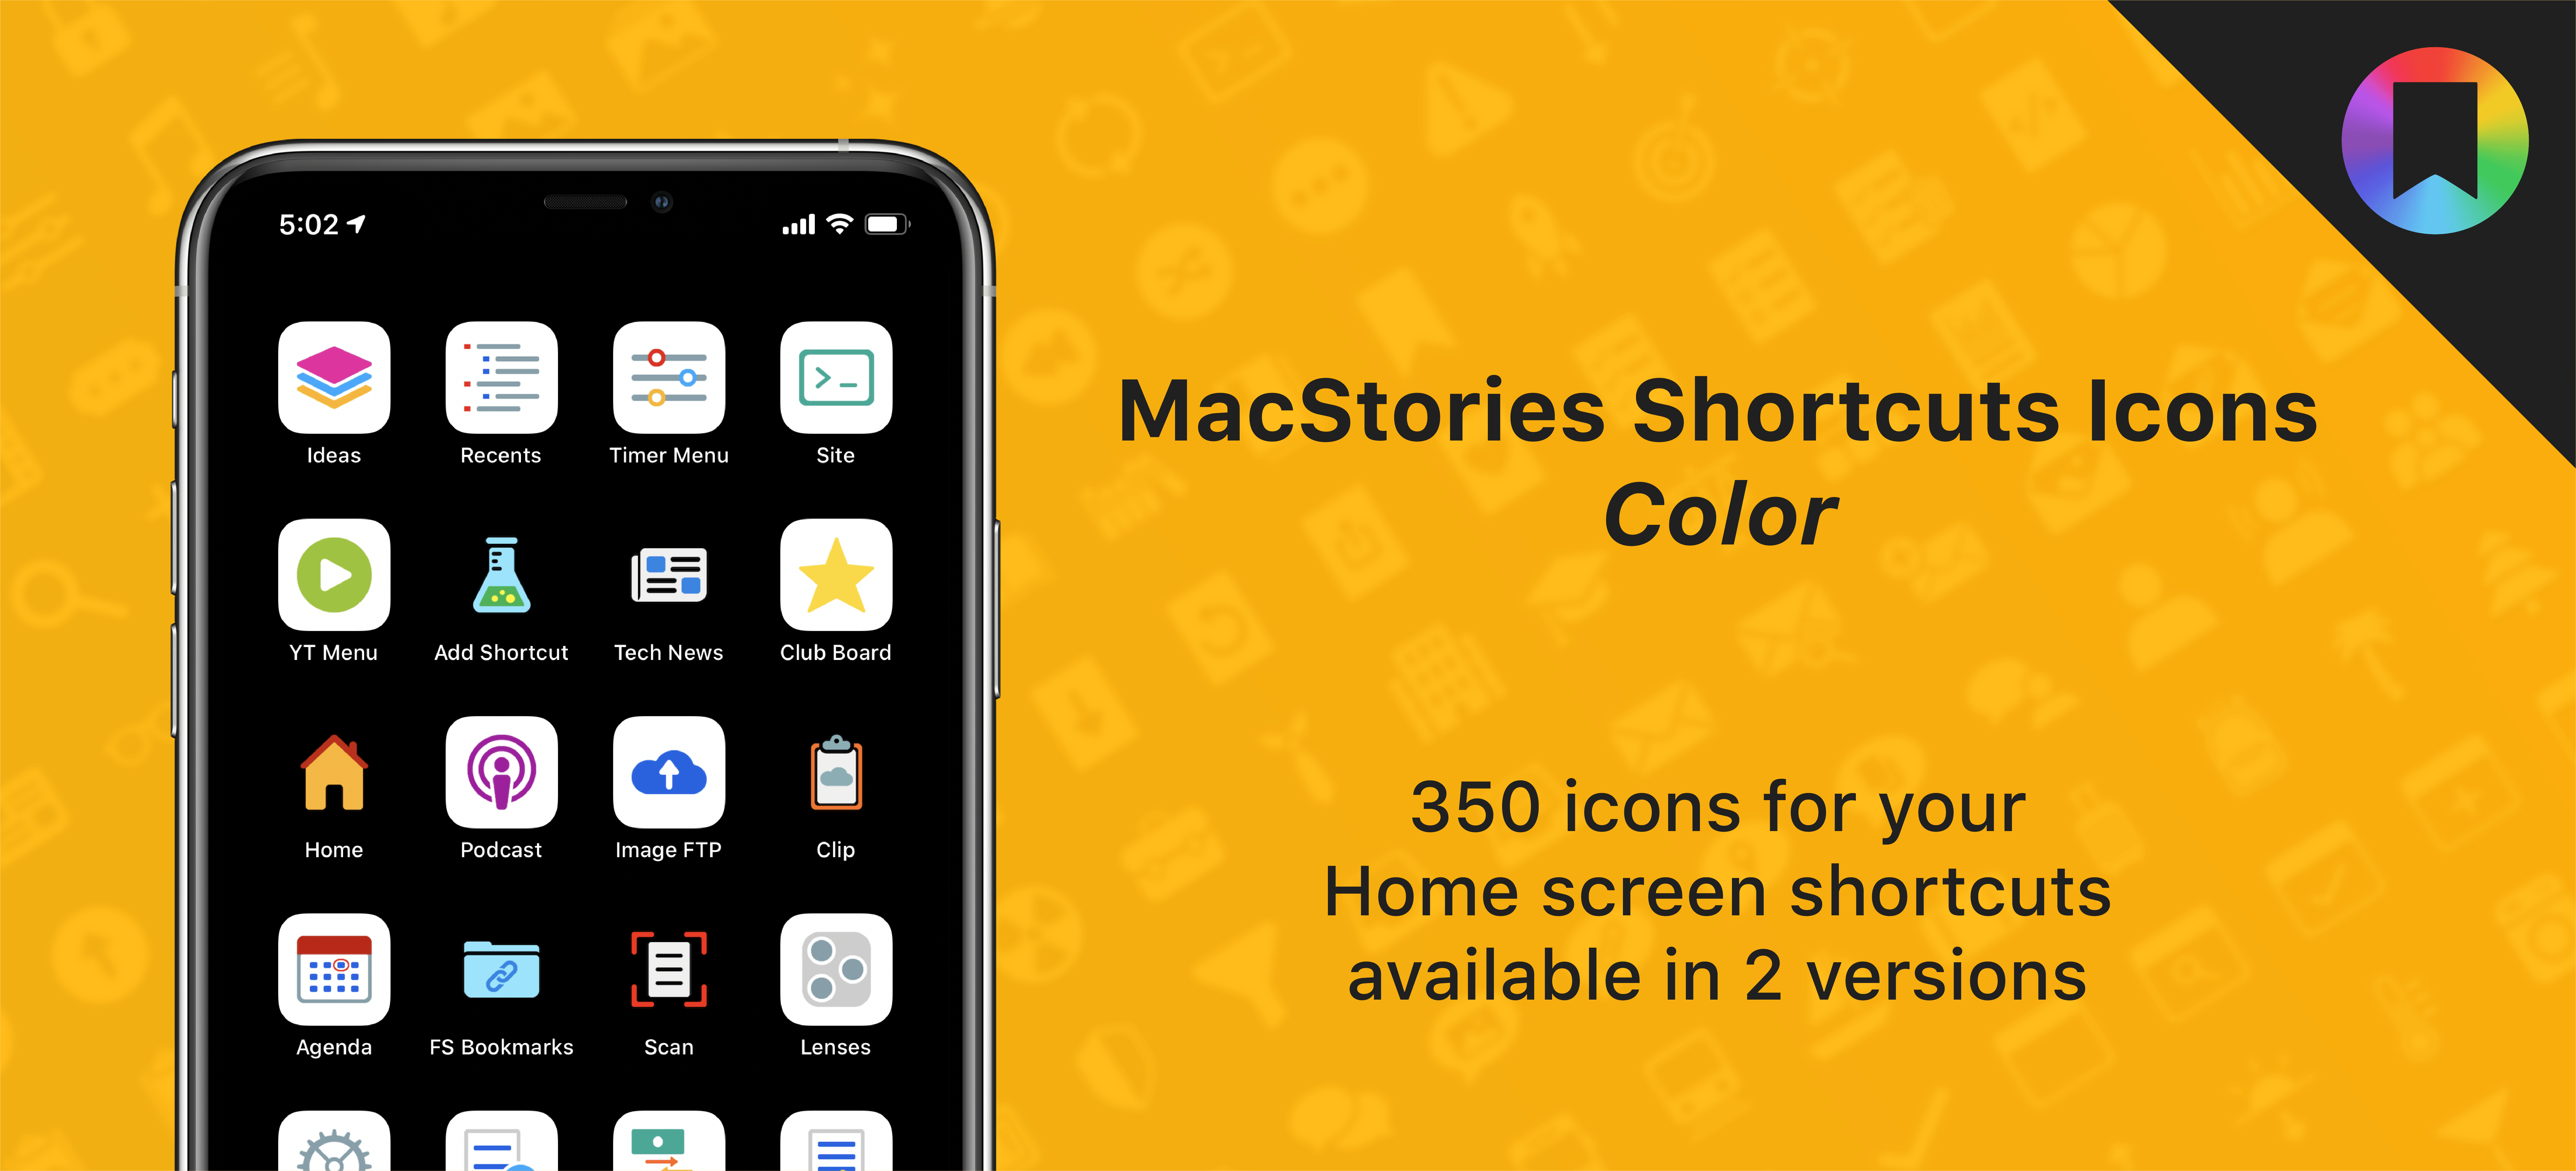 The Color set is a brand new version of MacStories Shortcuts Icons.